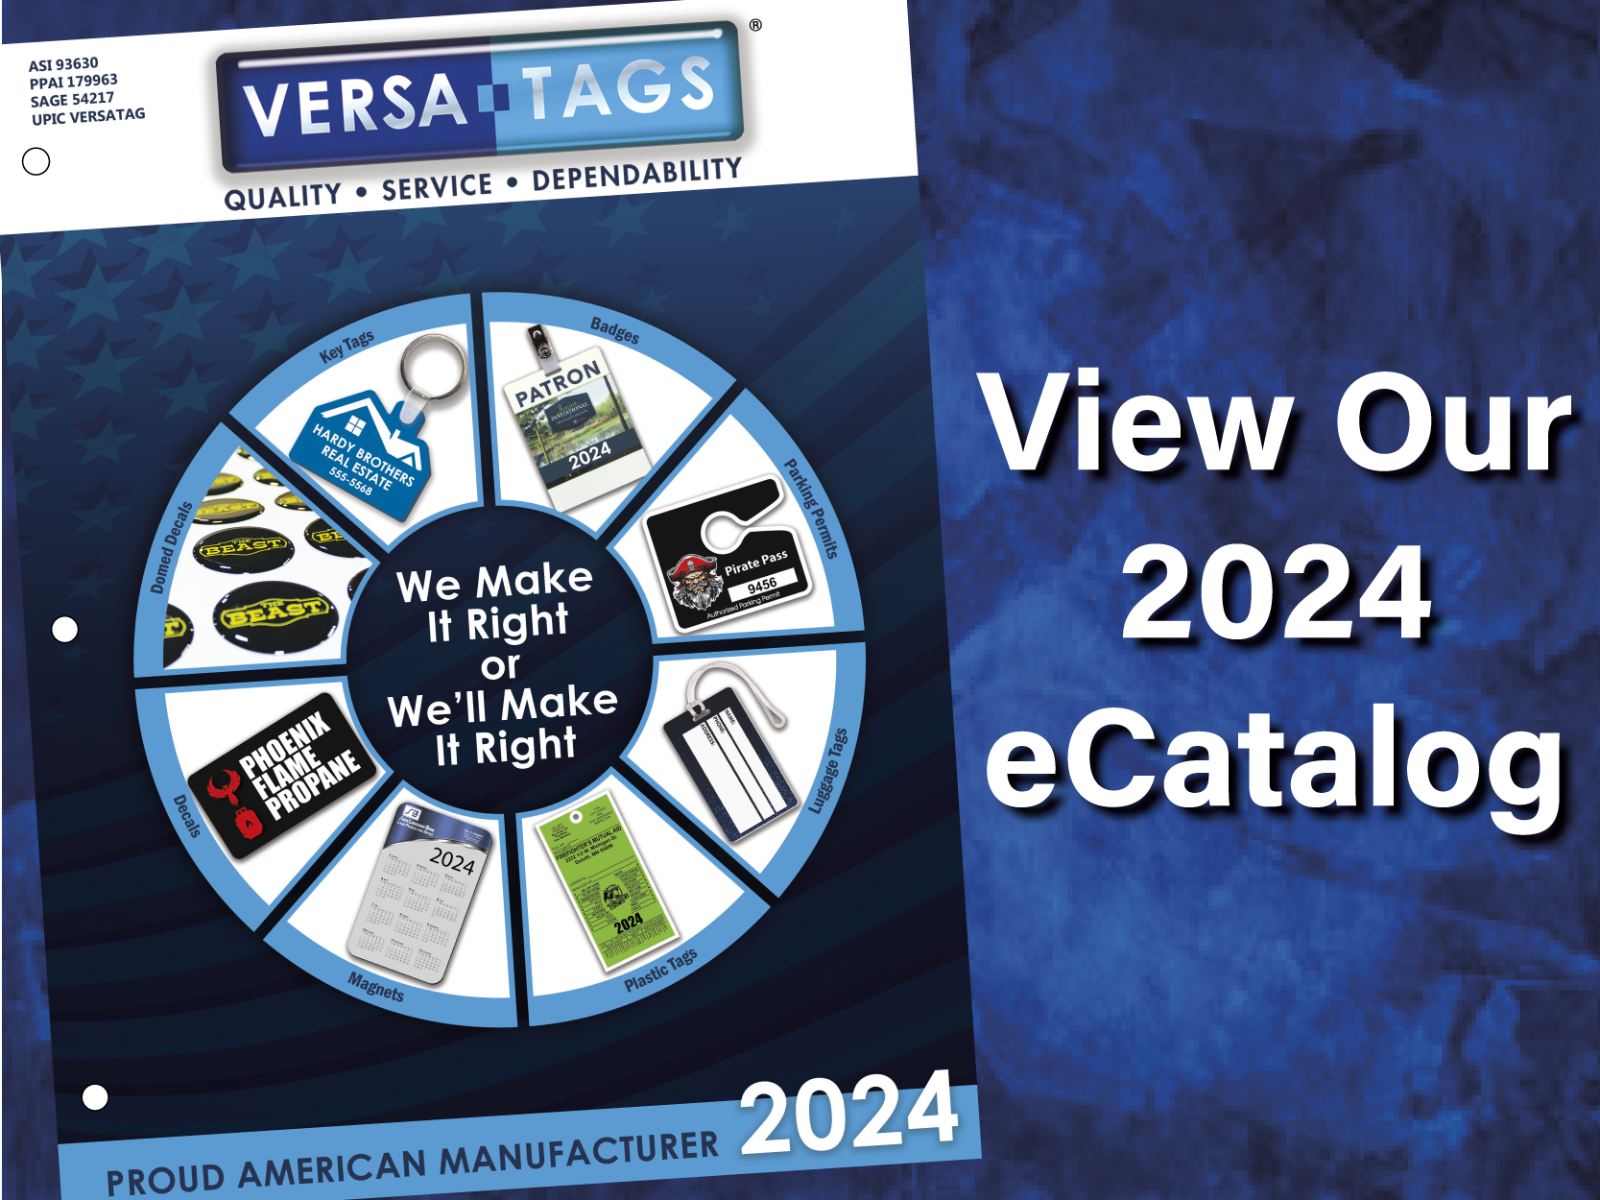 Link for the Versa-Tags 2024 Catalog